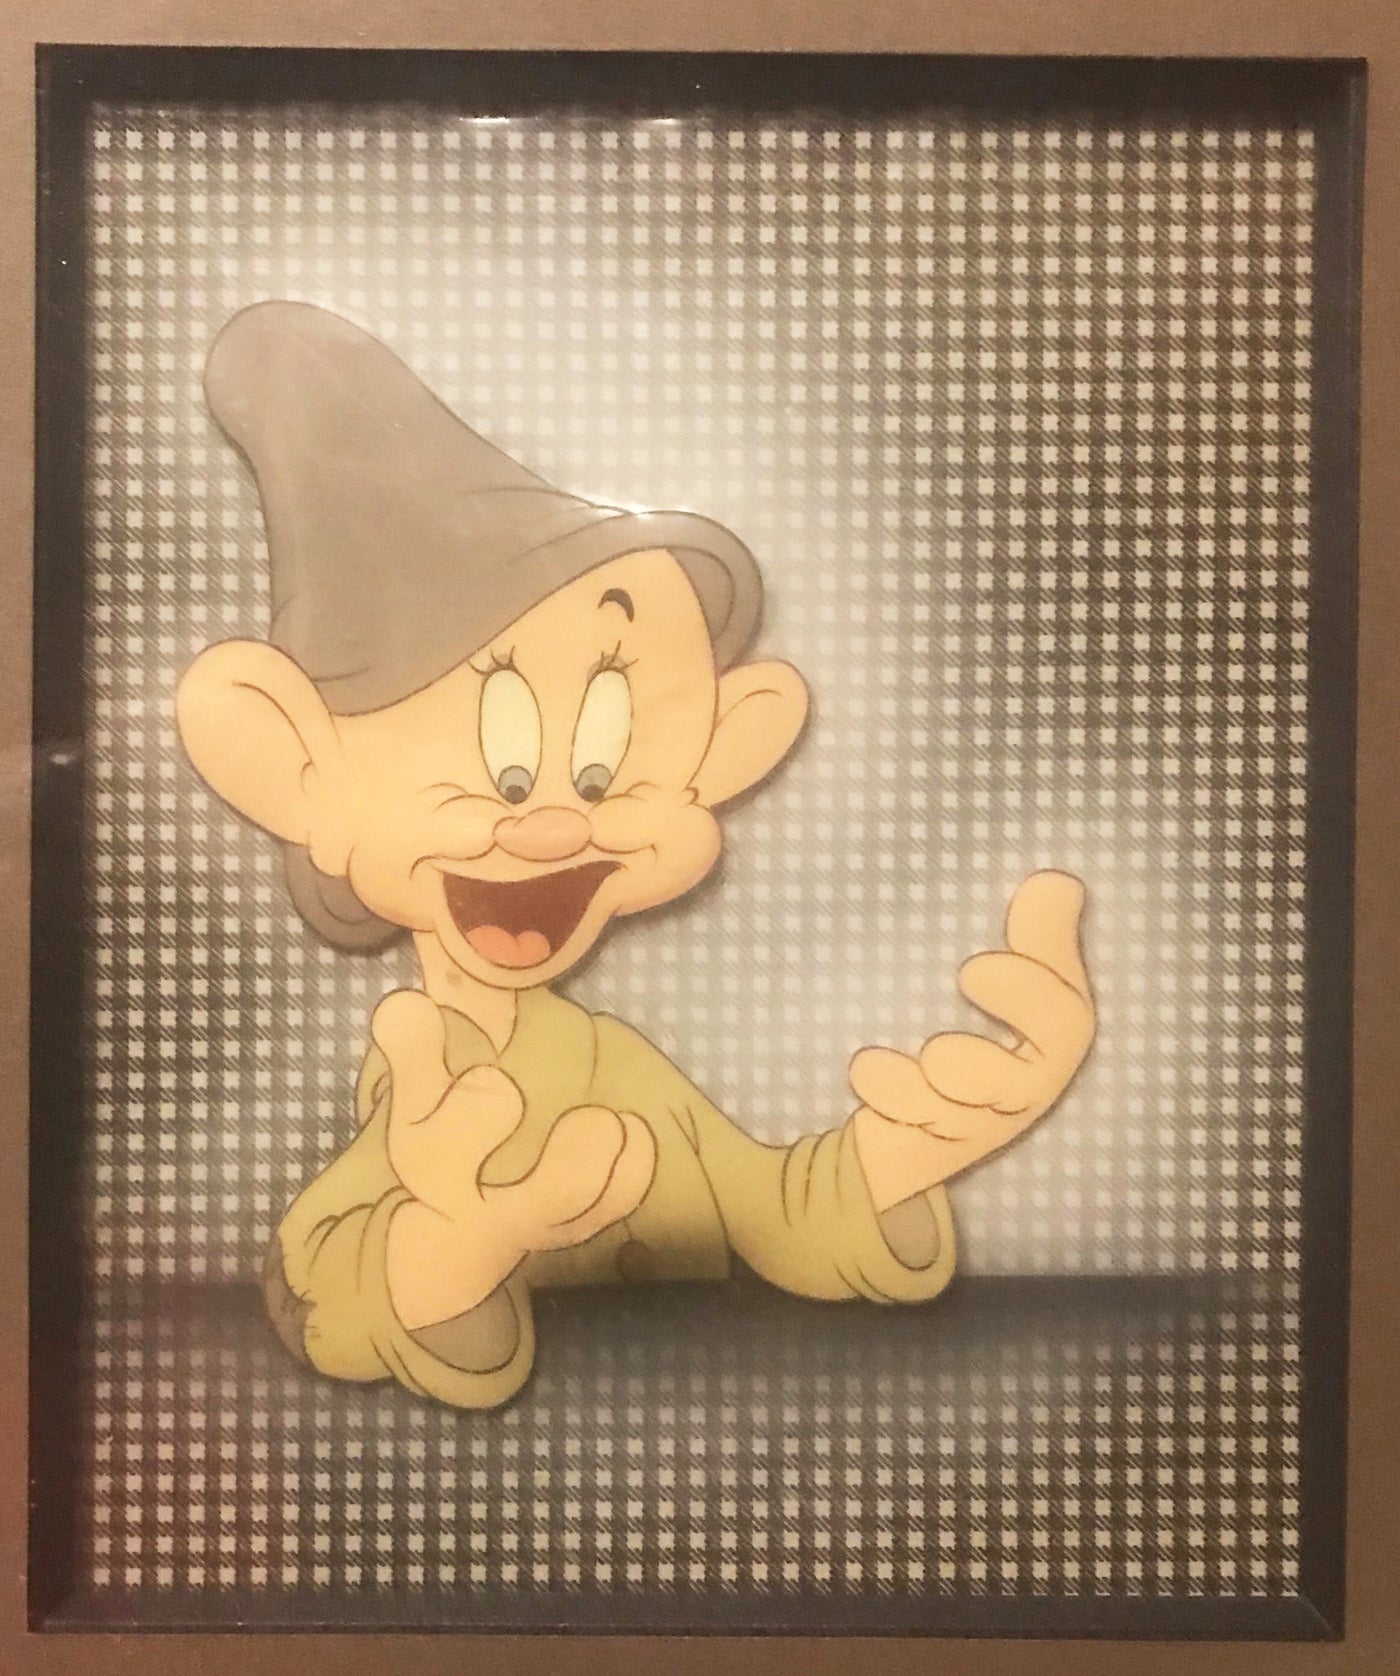 Walt Disney Production Cel on Courvoisier Background from Snow White and the Seven Dwarfs featuring Dopey